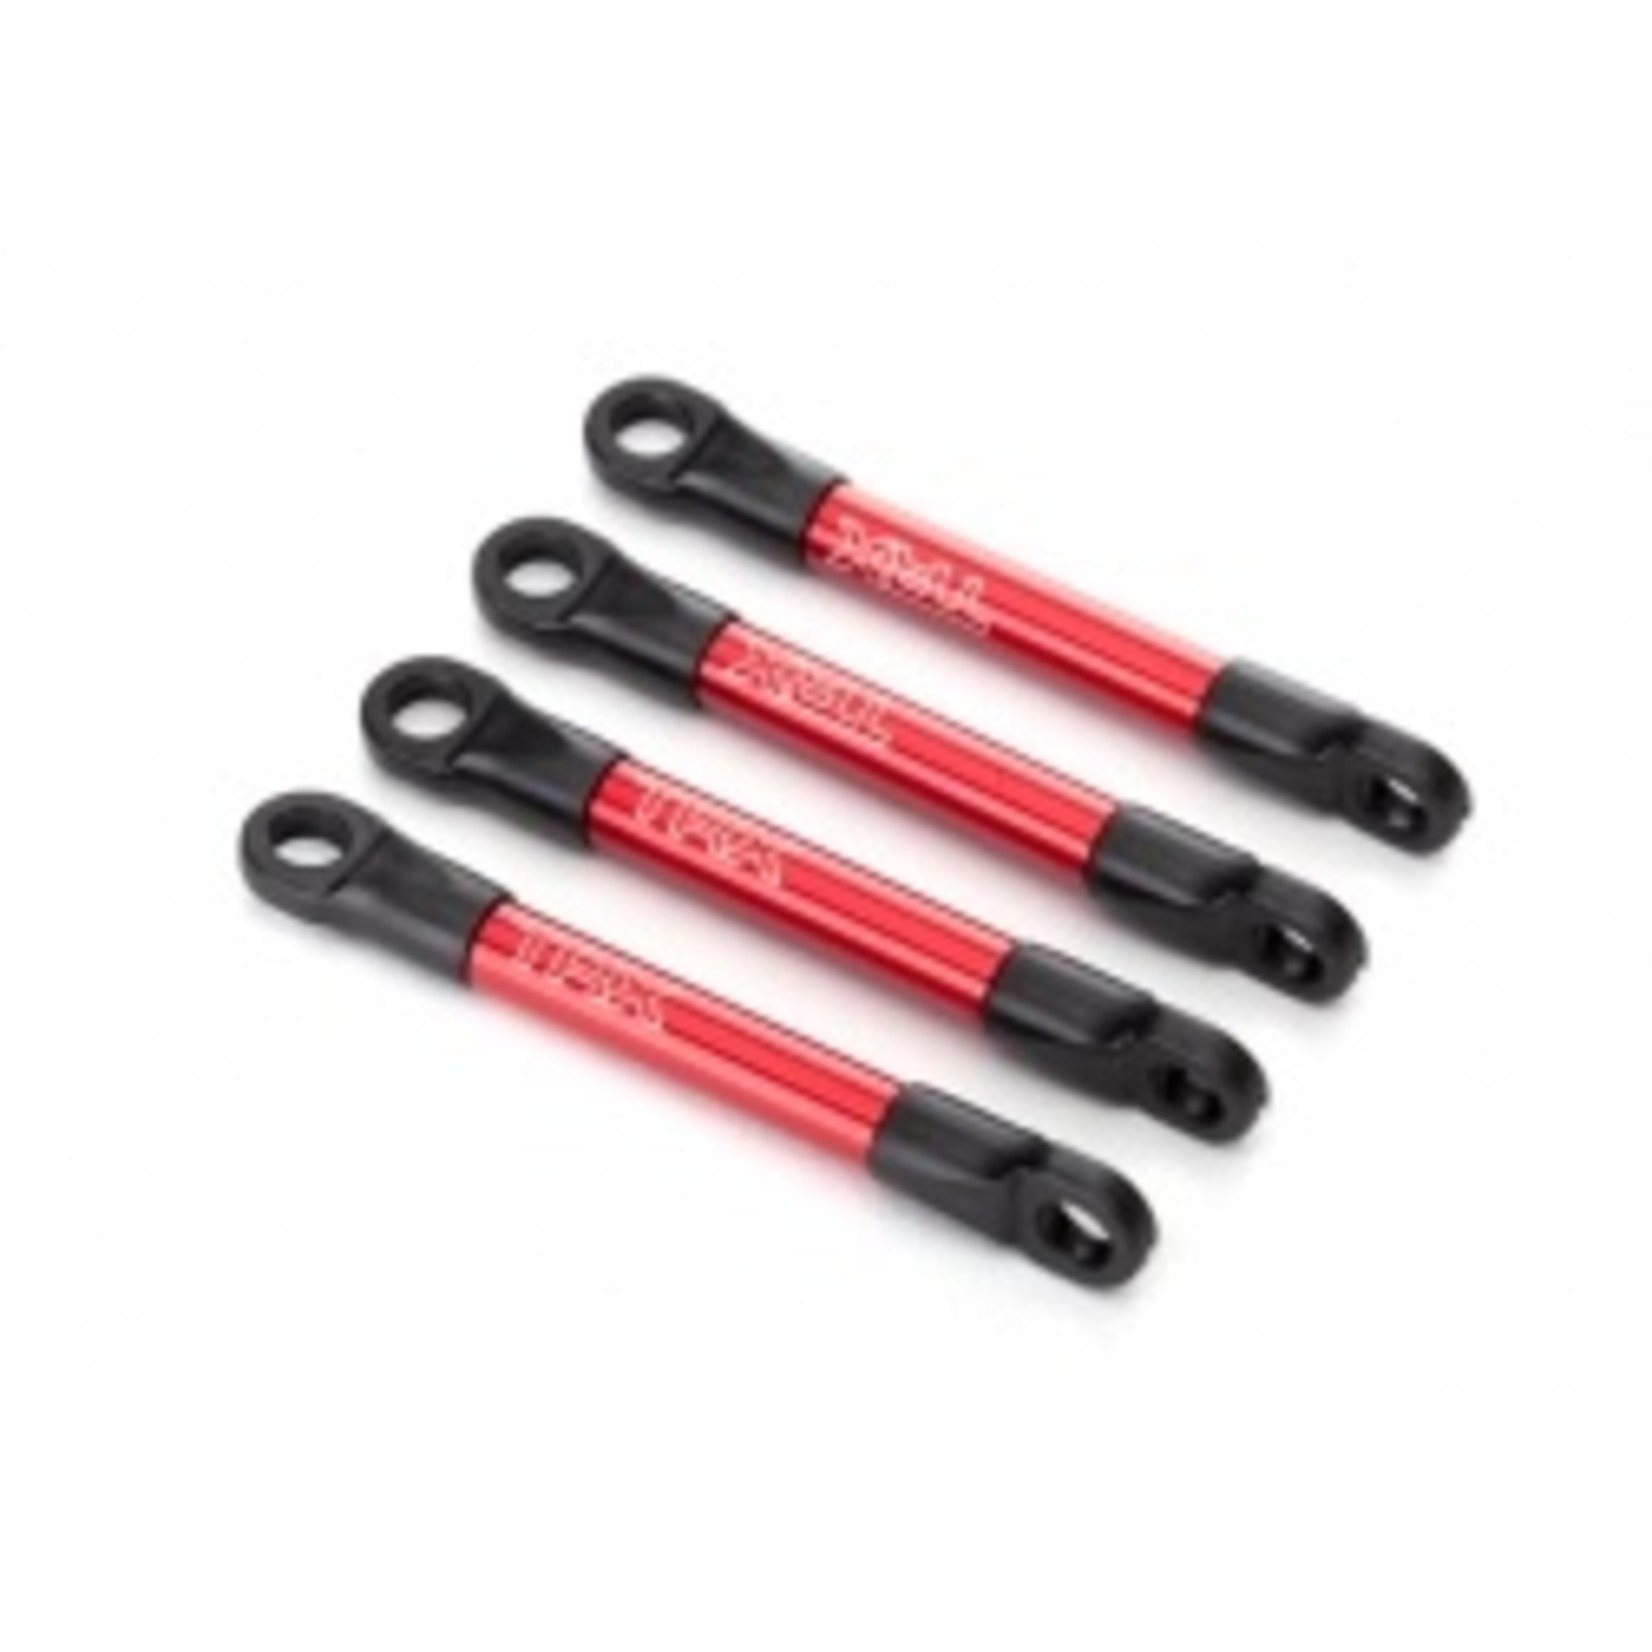 Traxxas Push rods, aluminum (red-anodized) (4) (assembled with rod ends)